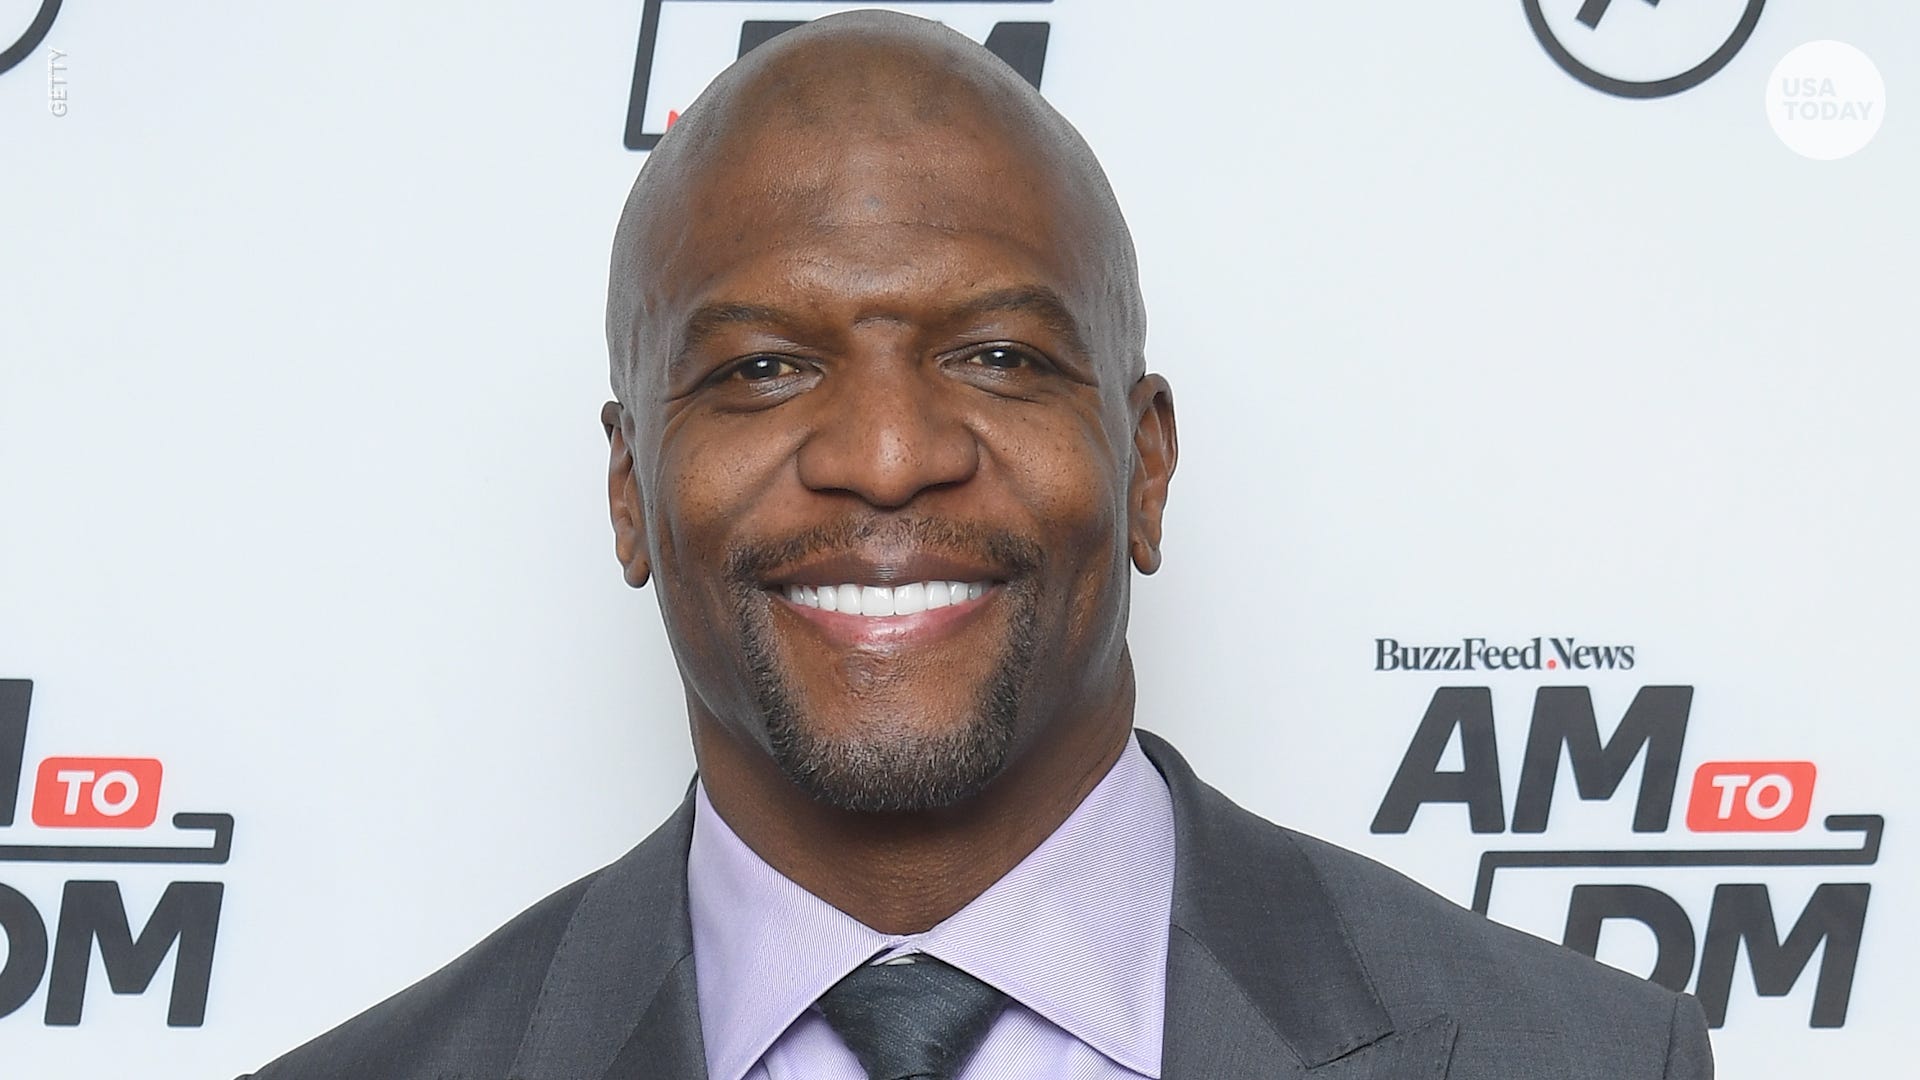 Terry Crews Net Worth 2022: How much does Terry Crews Make a Year?